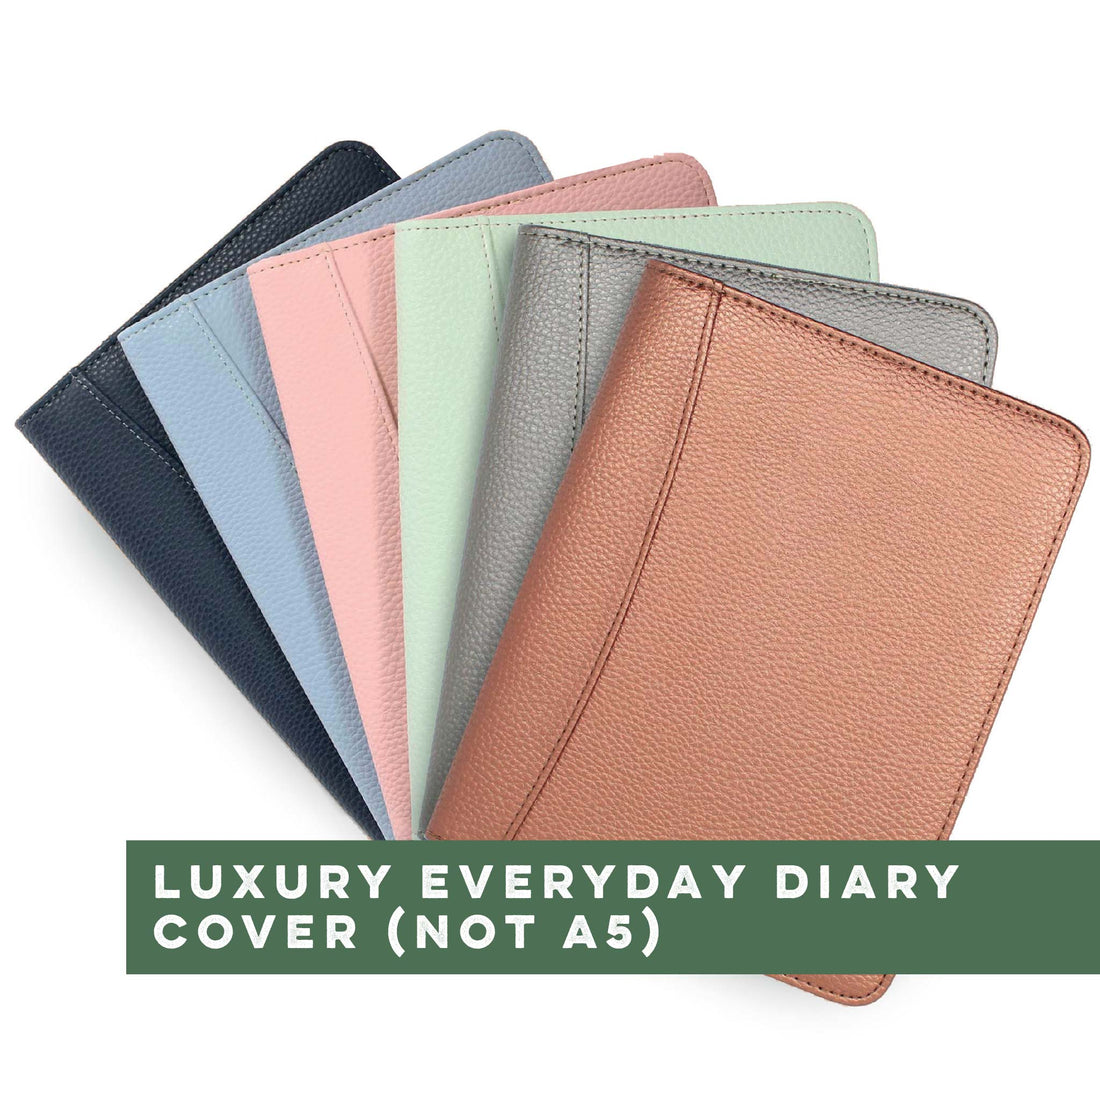 Luxury Everyday Diary Cover (Not A5)